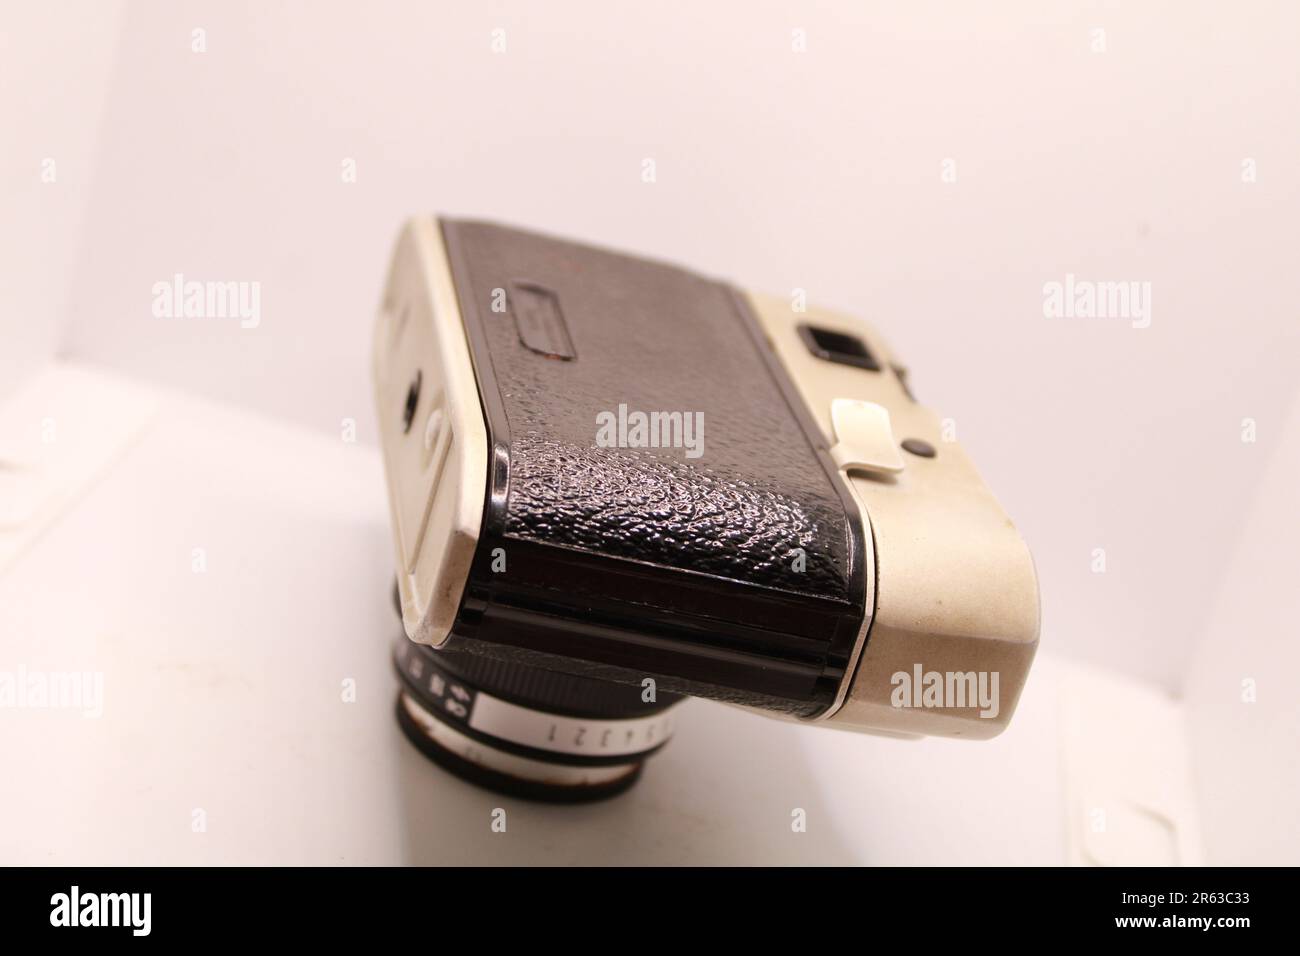 A very Old vintage black and white photography camera on White Background. Stock Photo